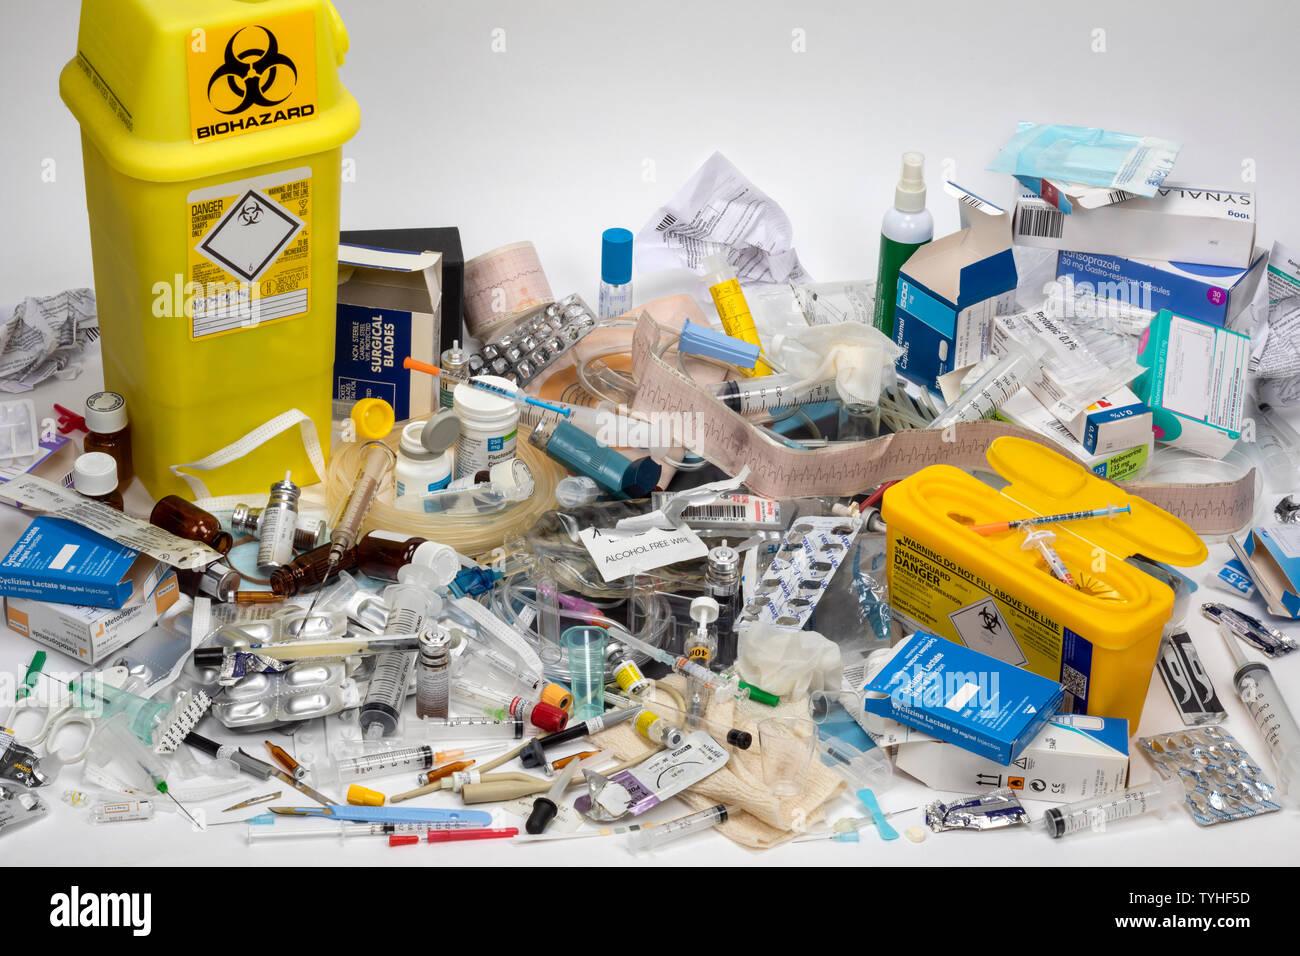 https://c8.alamy.com/comp/TYHF5D/medical-waste-disposal-of-some-of-the-many-use-once-plastic-paper-cardboard-glass-and-metal-items-used-in-modern-medicine-TYHF5D.jpg